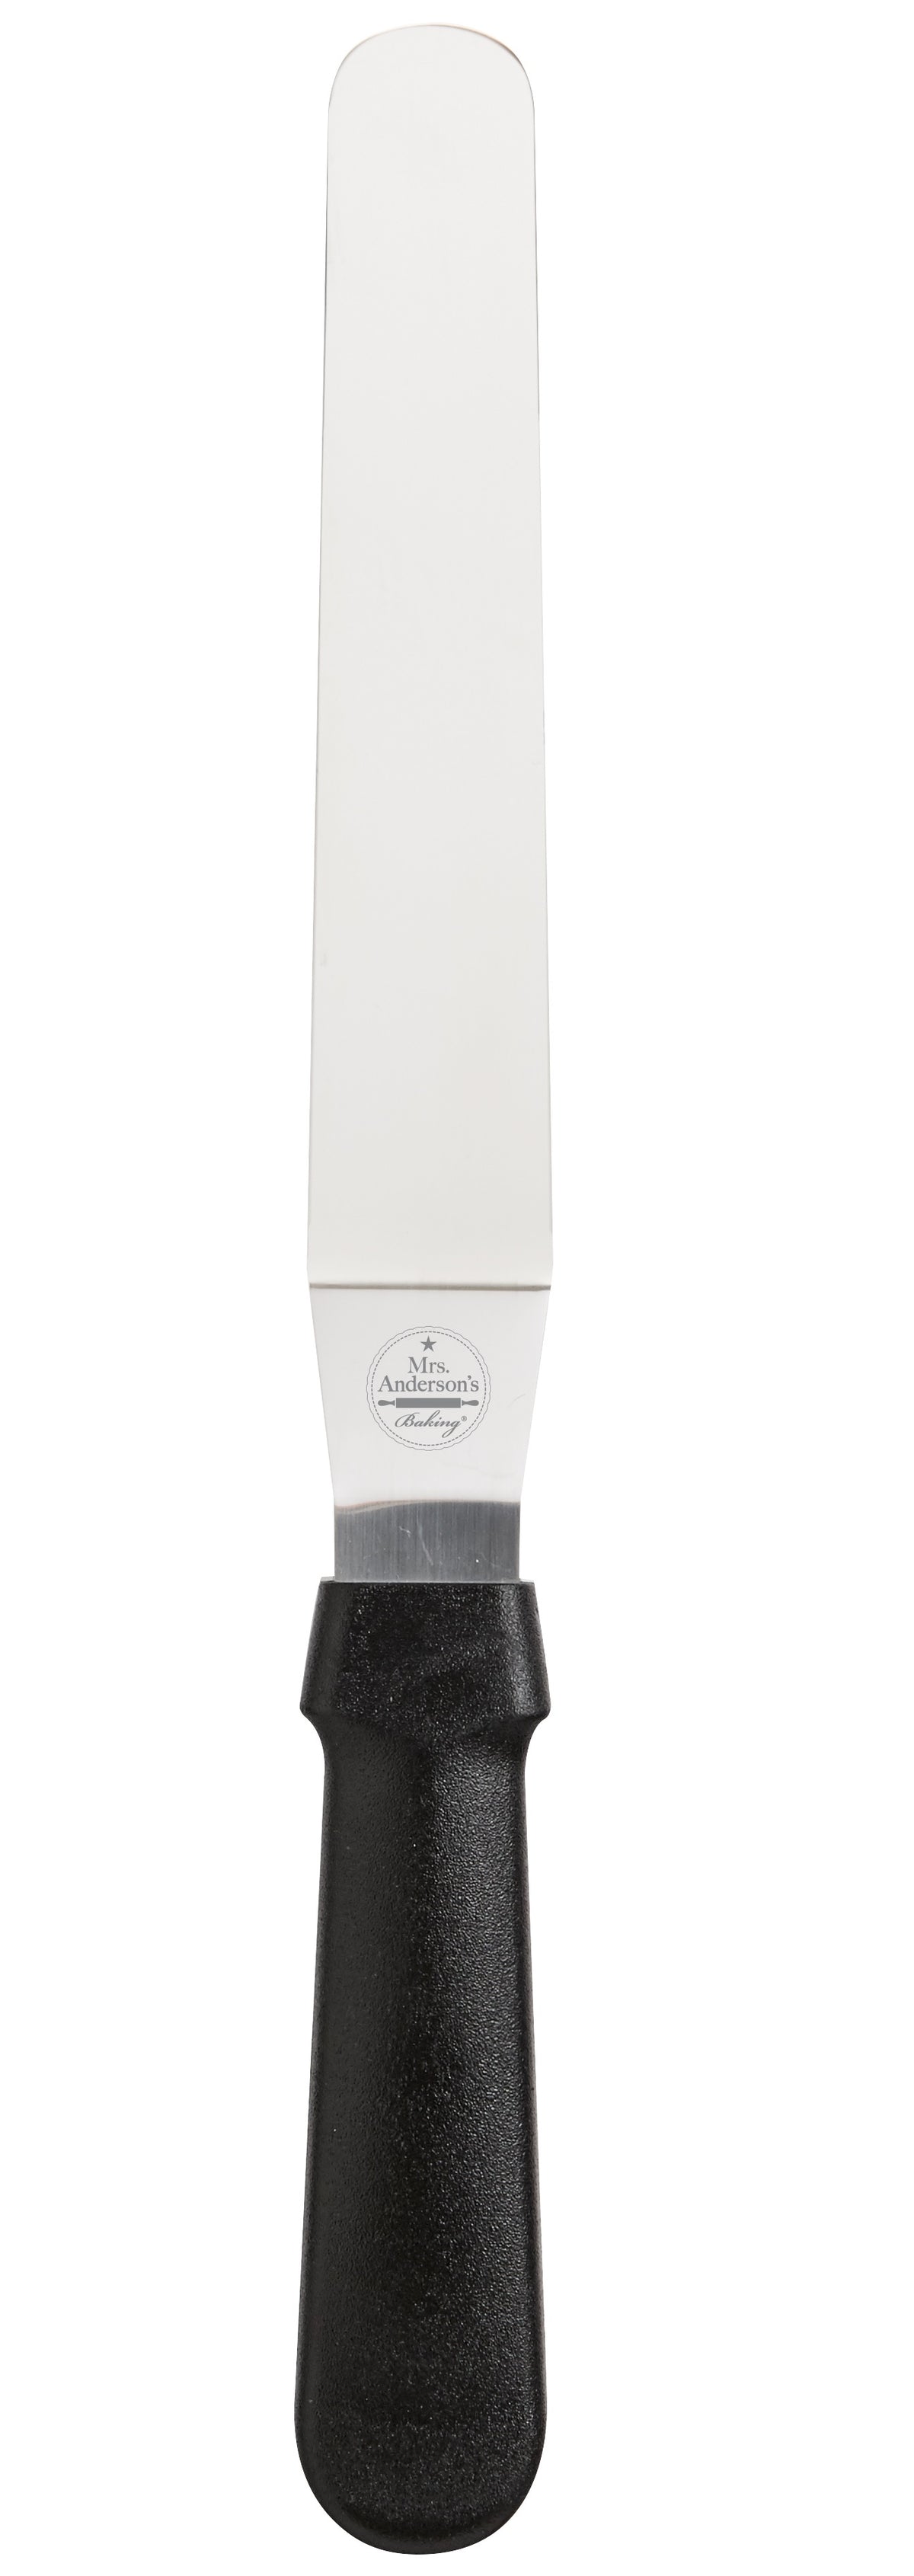 Mrs. Anderson's 43802 Offset Icing Spatula, 8"